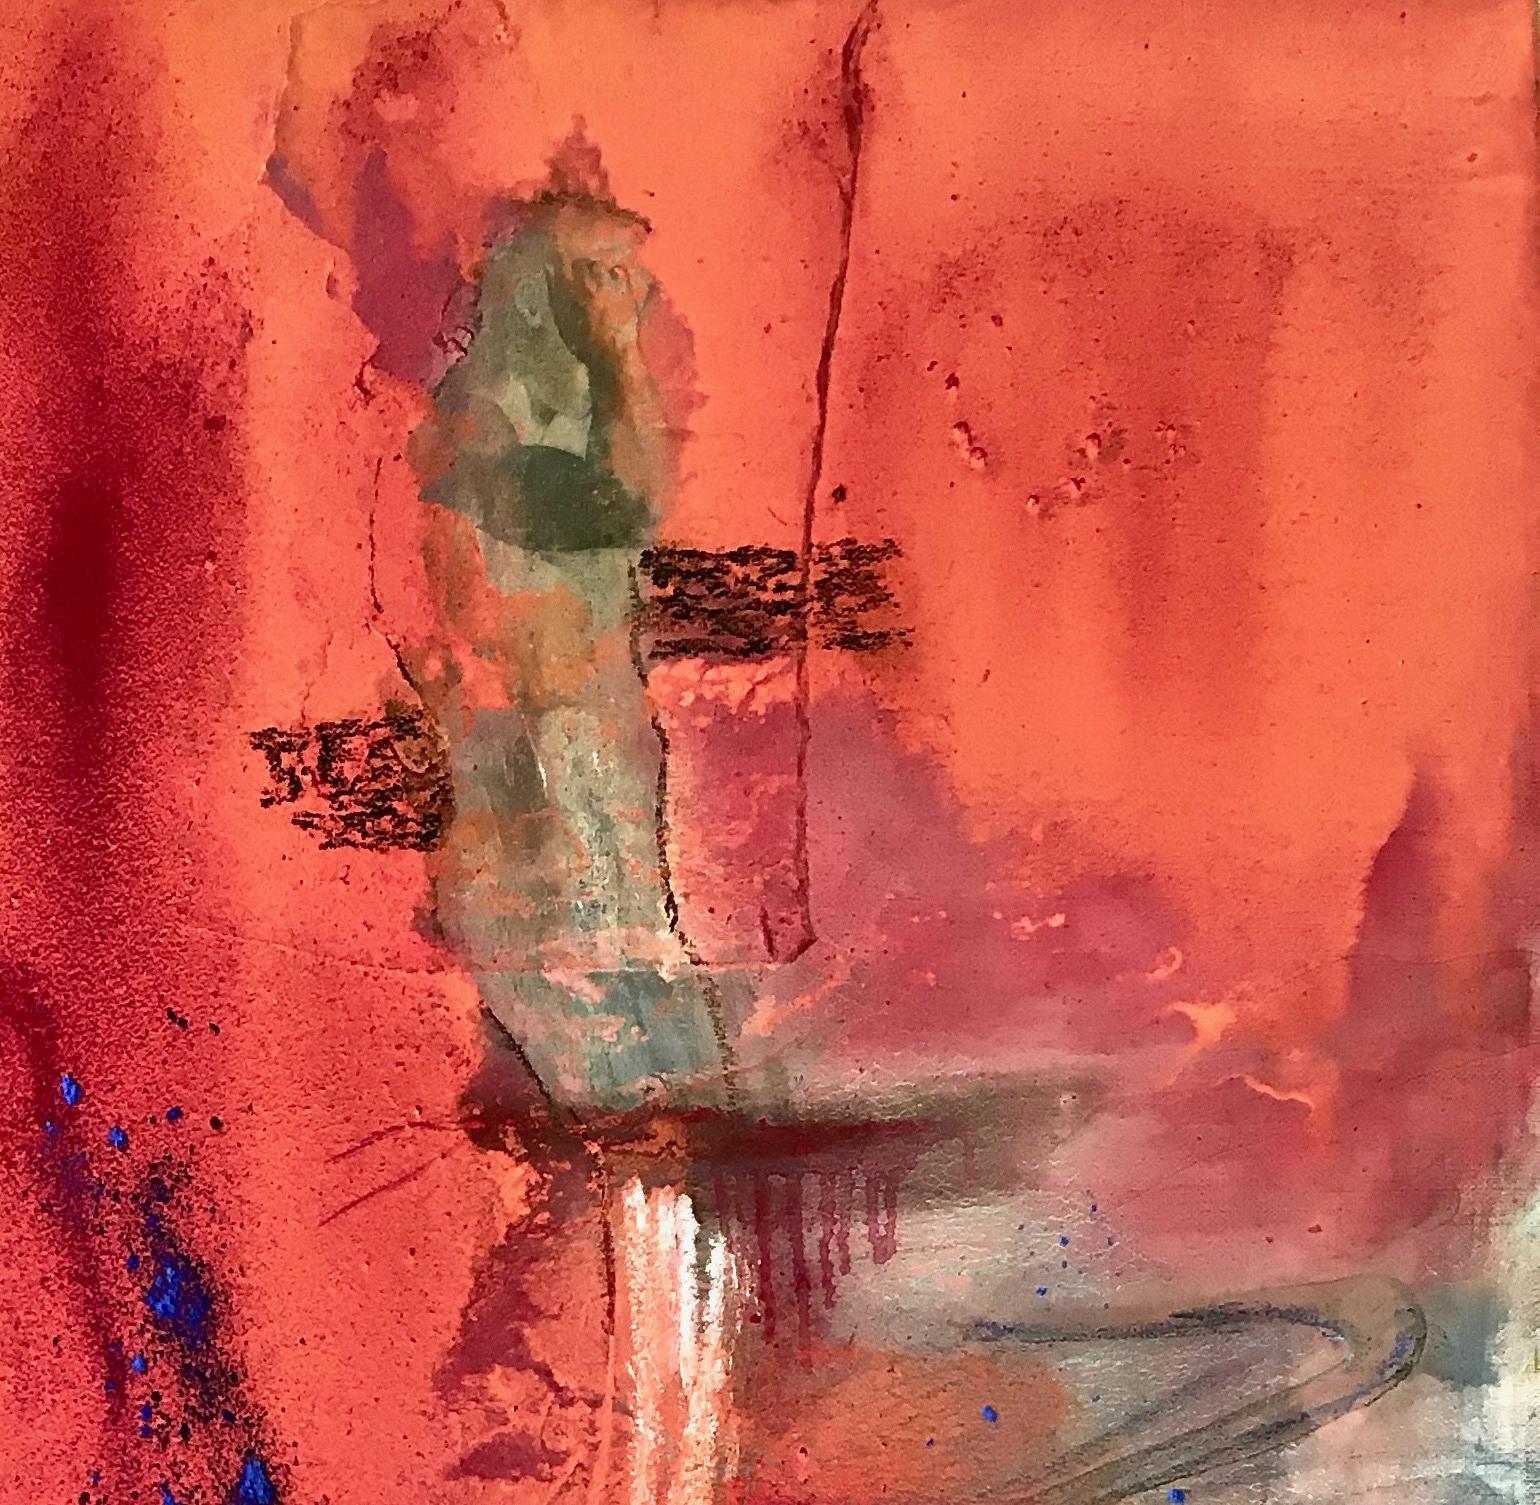 Eruption - Orange Abstract Painting by Andre Laurenti